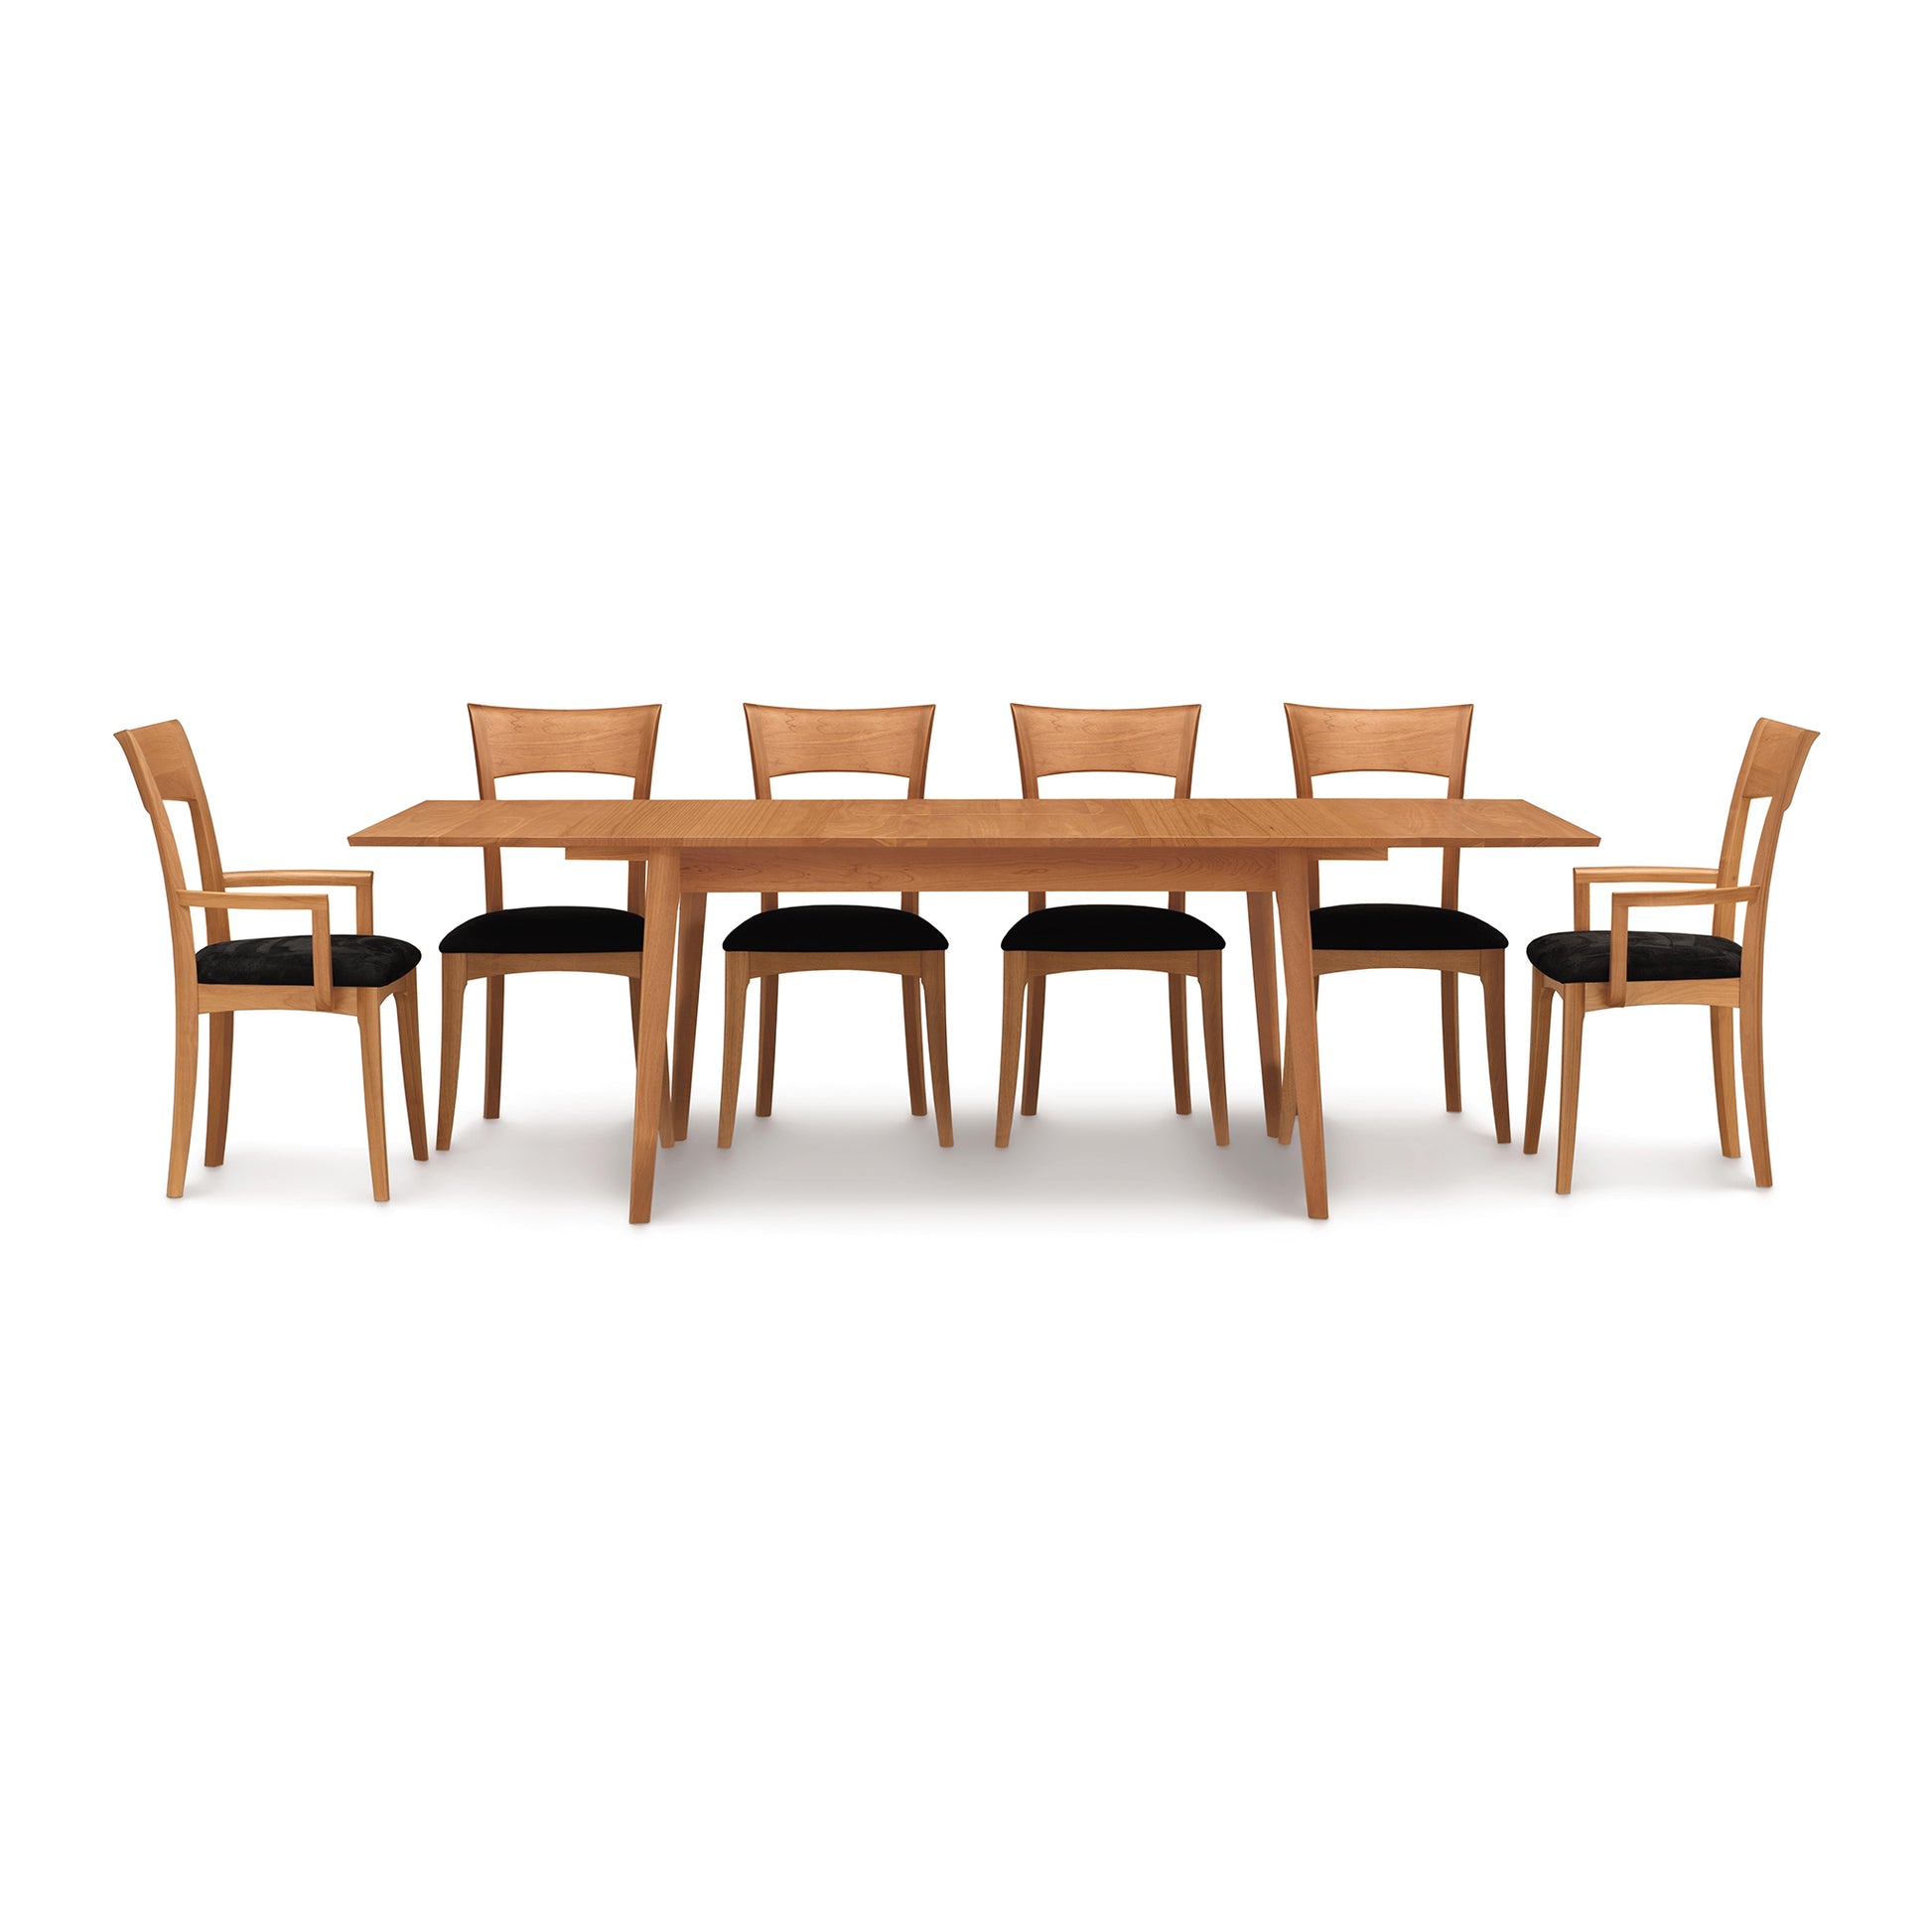 A Copeland Furniture Catalina Extension Table set with six matching chairs, isolated on a white background.